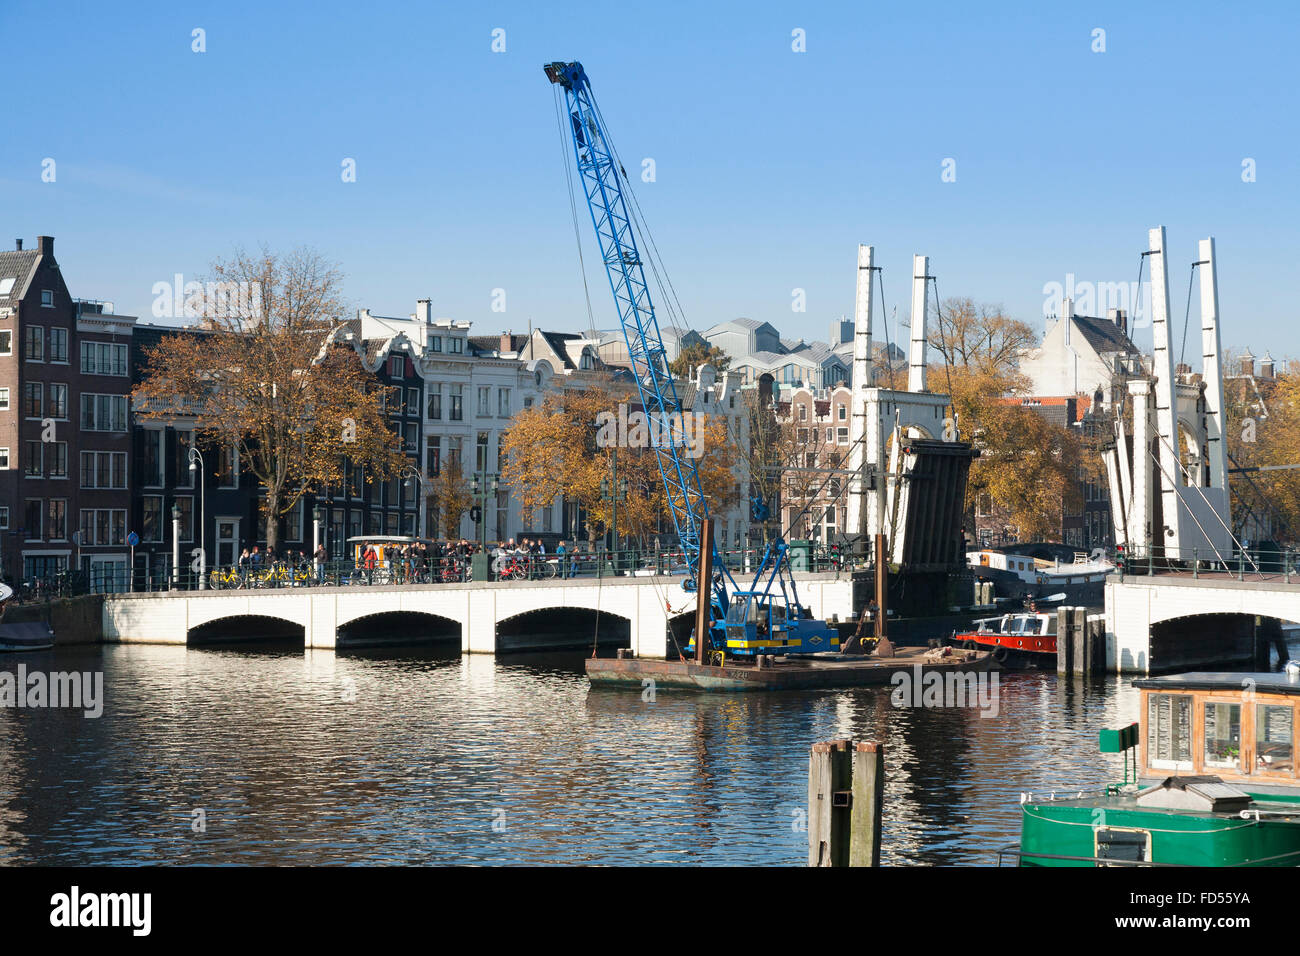 Boat / barge passes under the Magere Brug ('Skinny Bridge') in Dutch capital Amsterdam, The Netherlands, Holland. Stock Photo